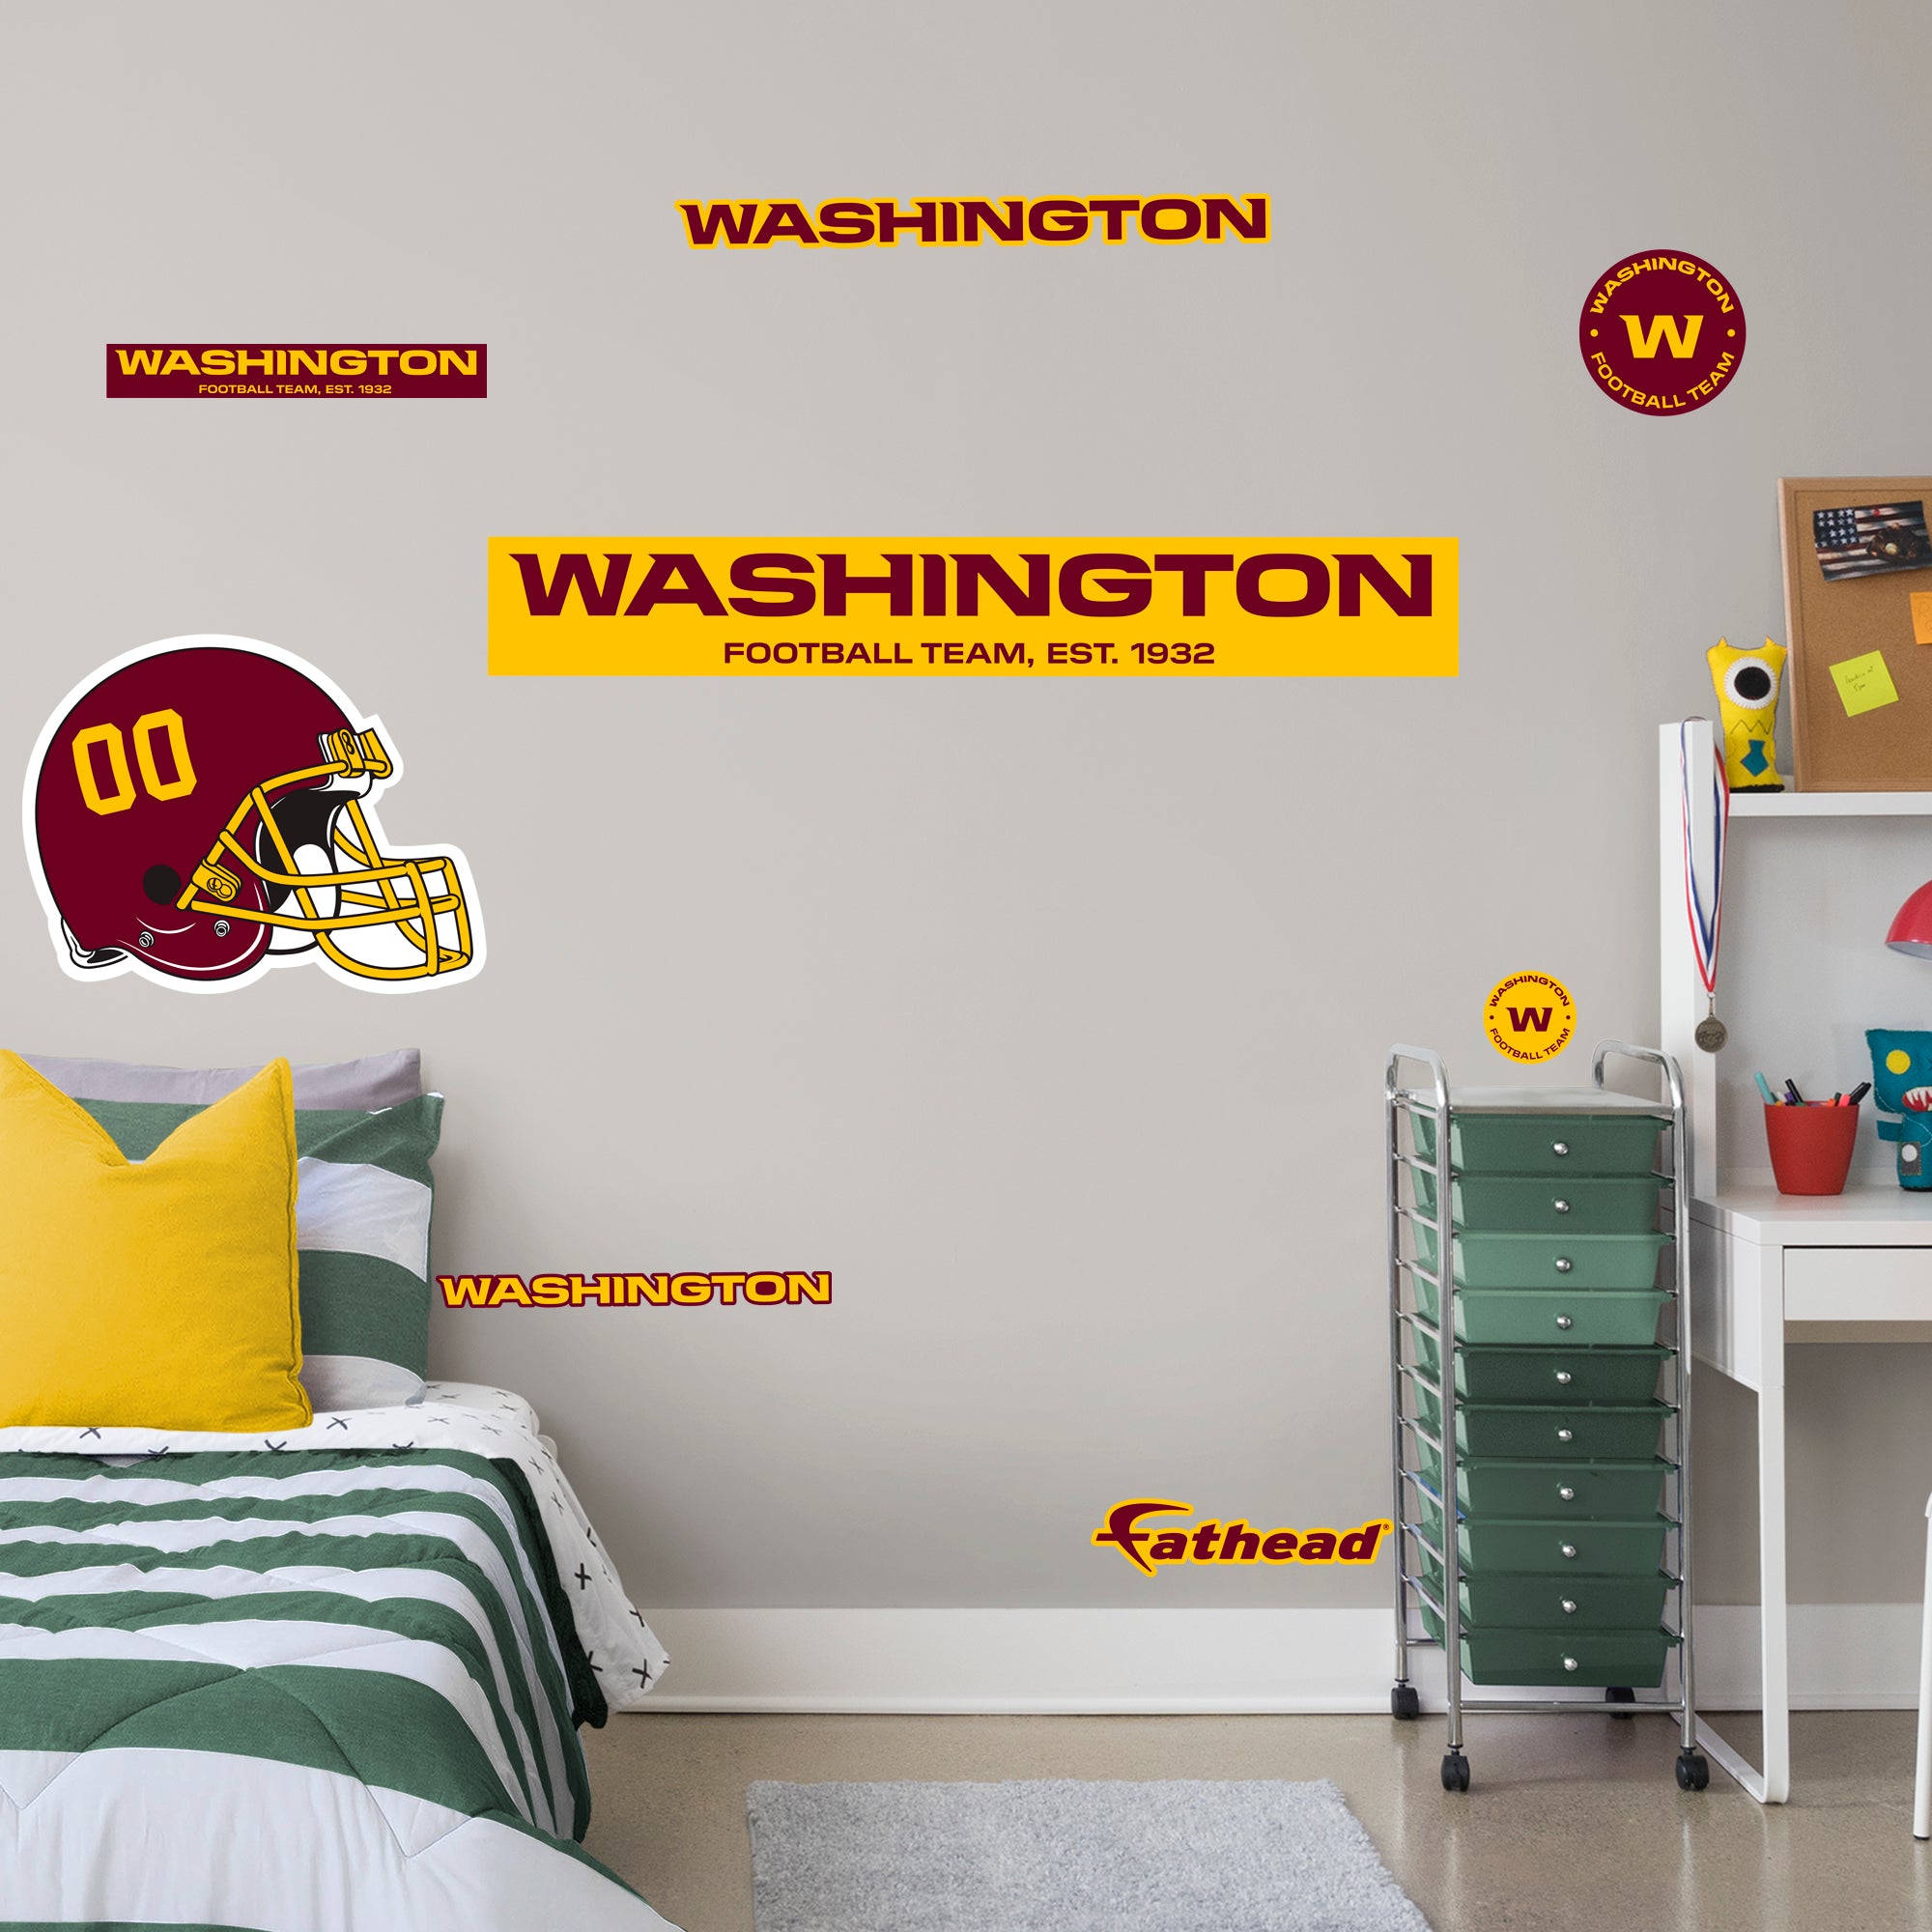 Washington Football Team: RealBig Logo - Officially Licensed NFL Removable Wall Decal Giant Logo + 7 Decals by Fathead | Vinyl